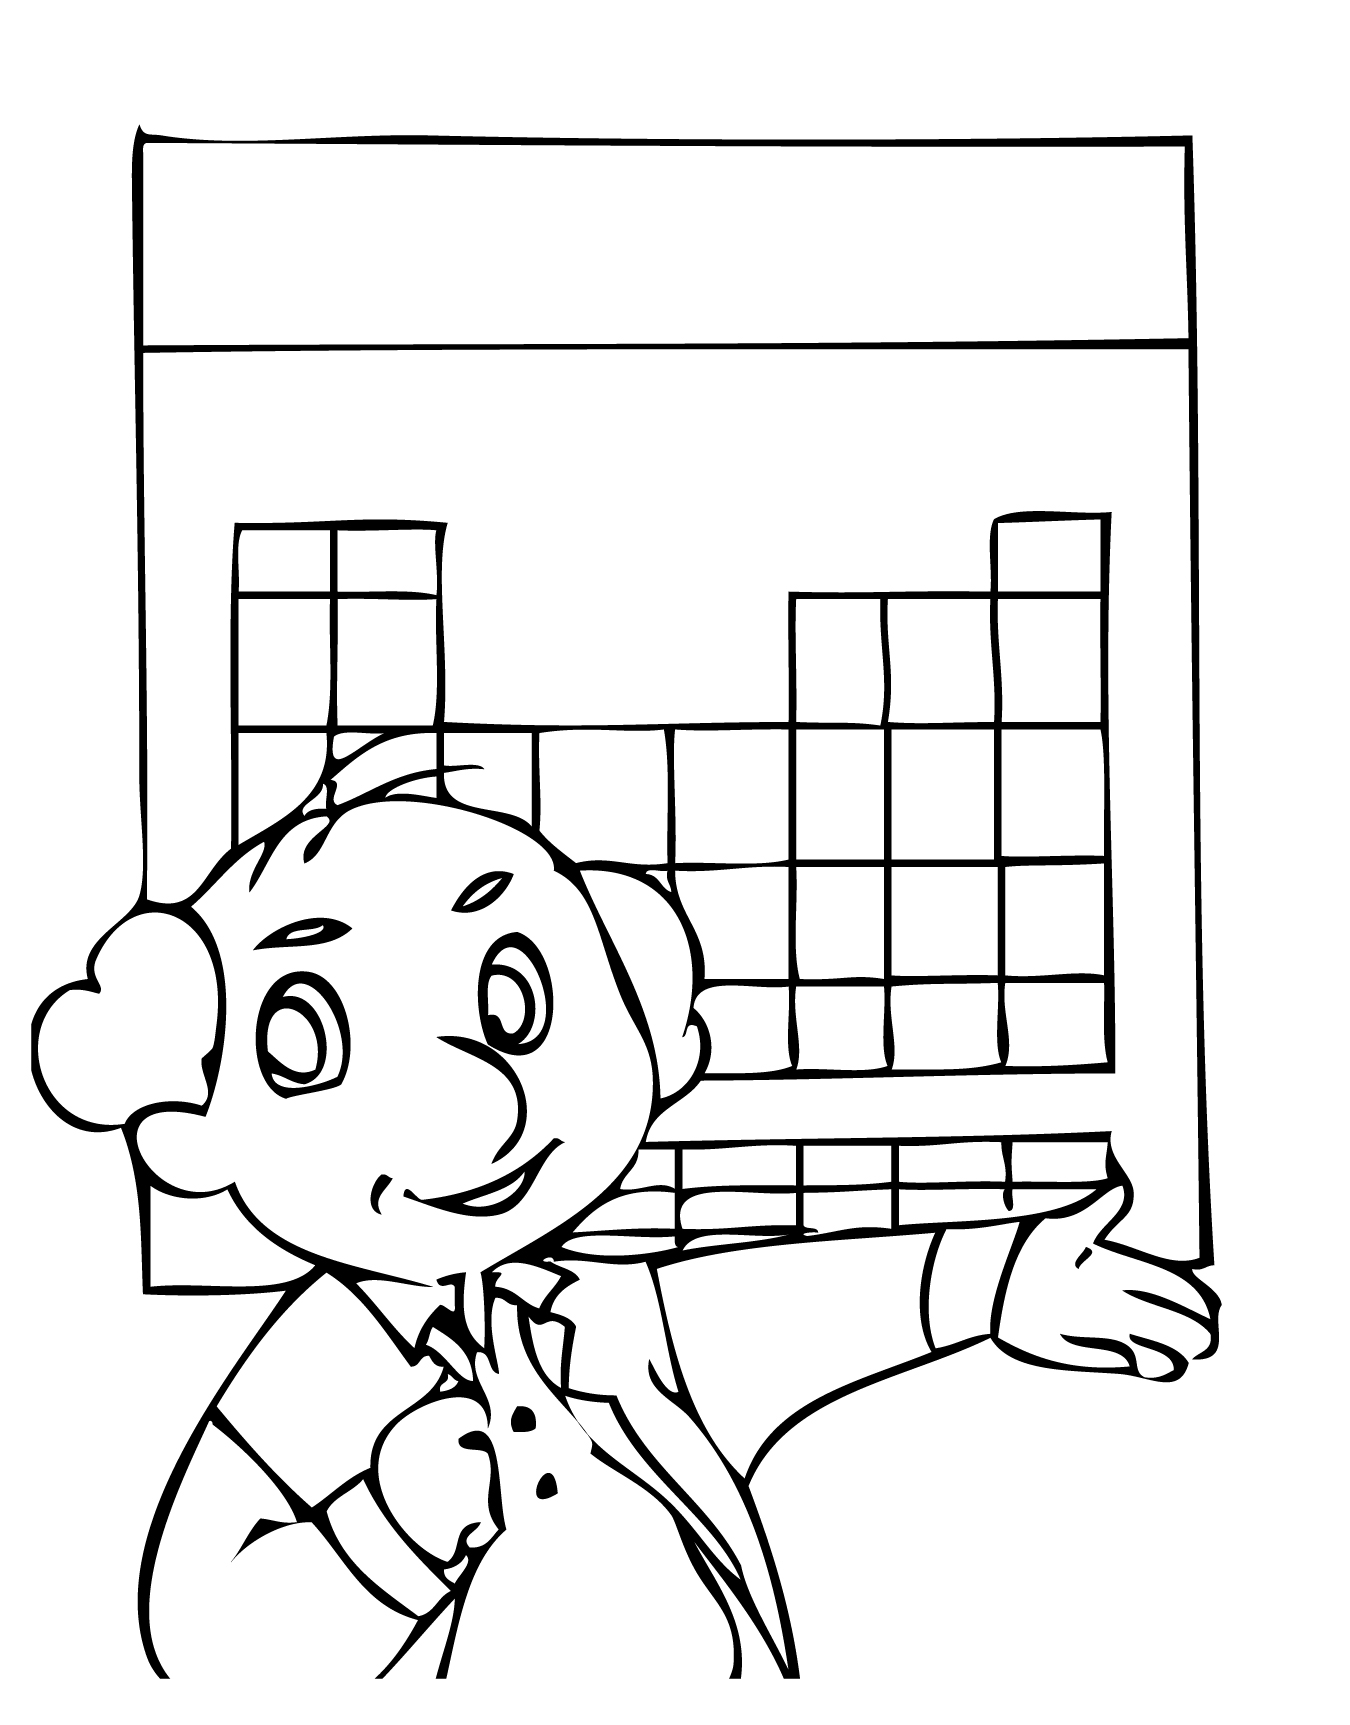 periodic table coloring pages - photo #6